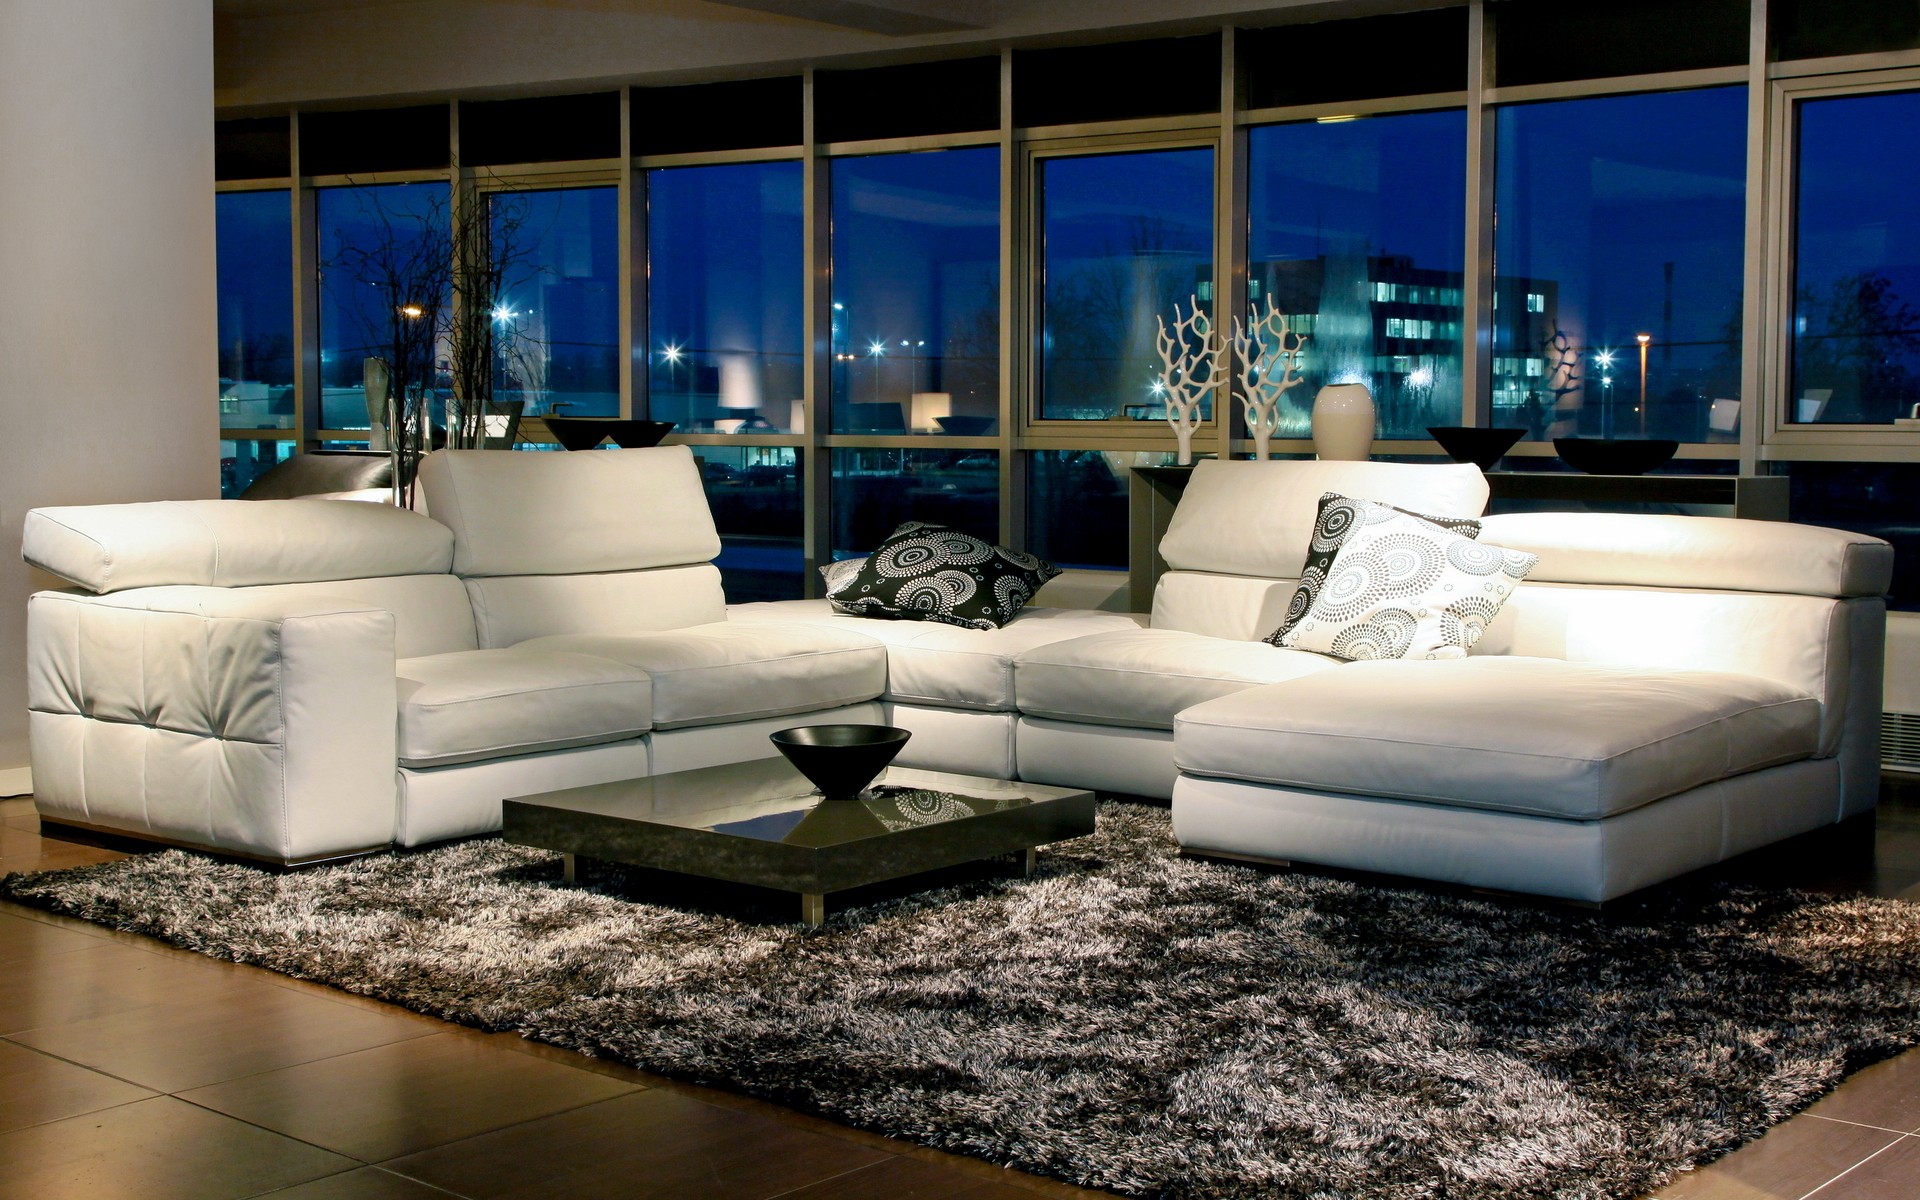 indoors interior design couch carpets cushions window Wallpaper